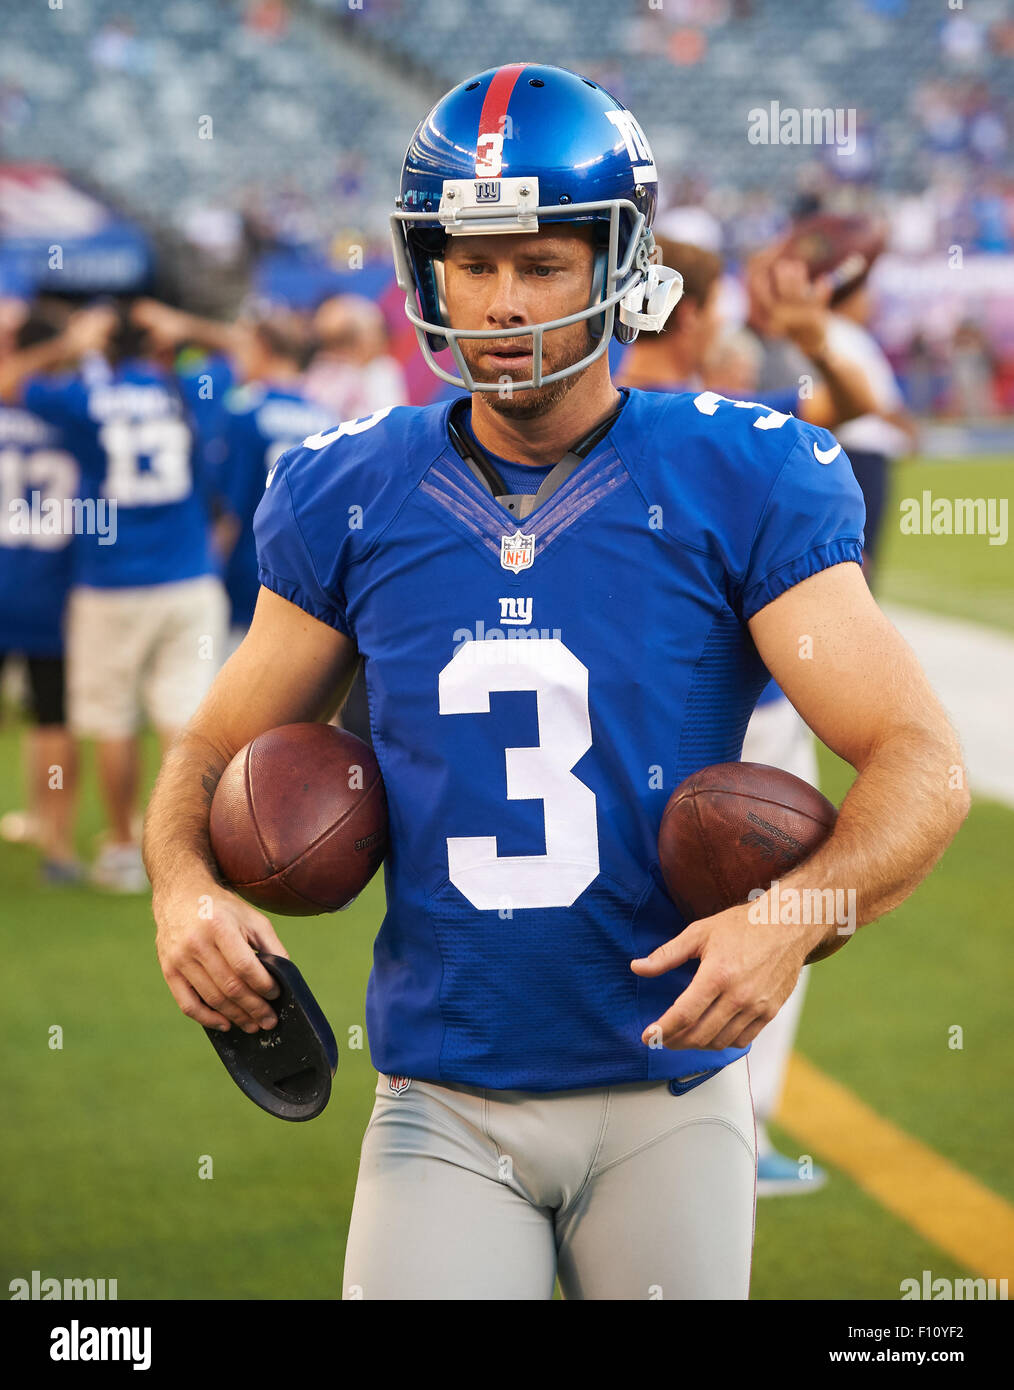 Aug. 24, 2015 - East Rutherford, New Jersey, U.S. - Giants' kicker Josh  Brown (3) during warm up price to preseason action between the Jacksonville  Jaguars and the New York Giants at